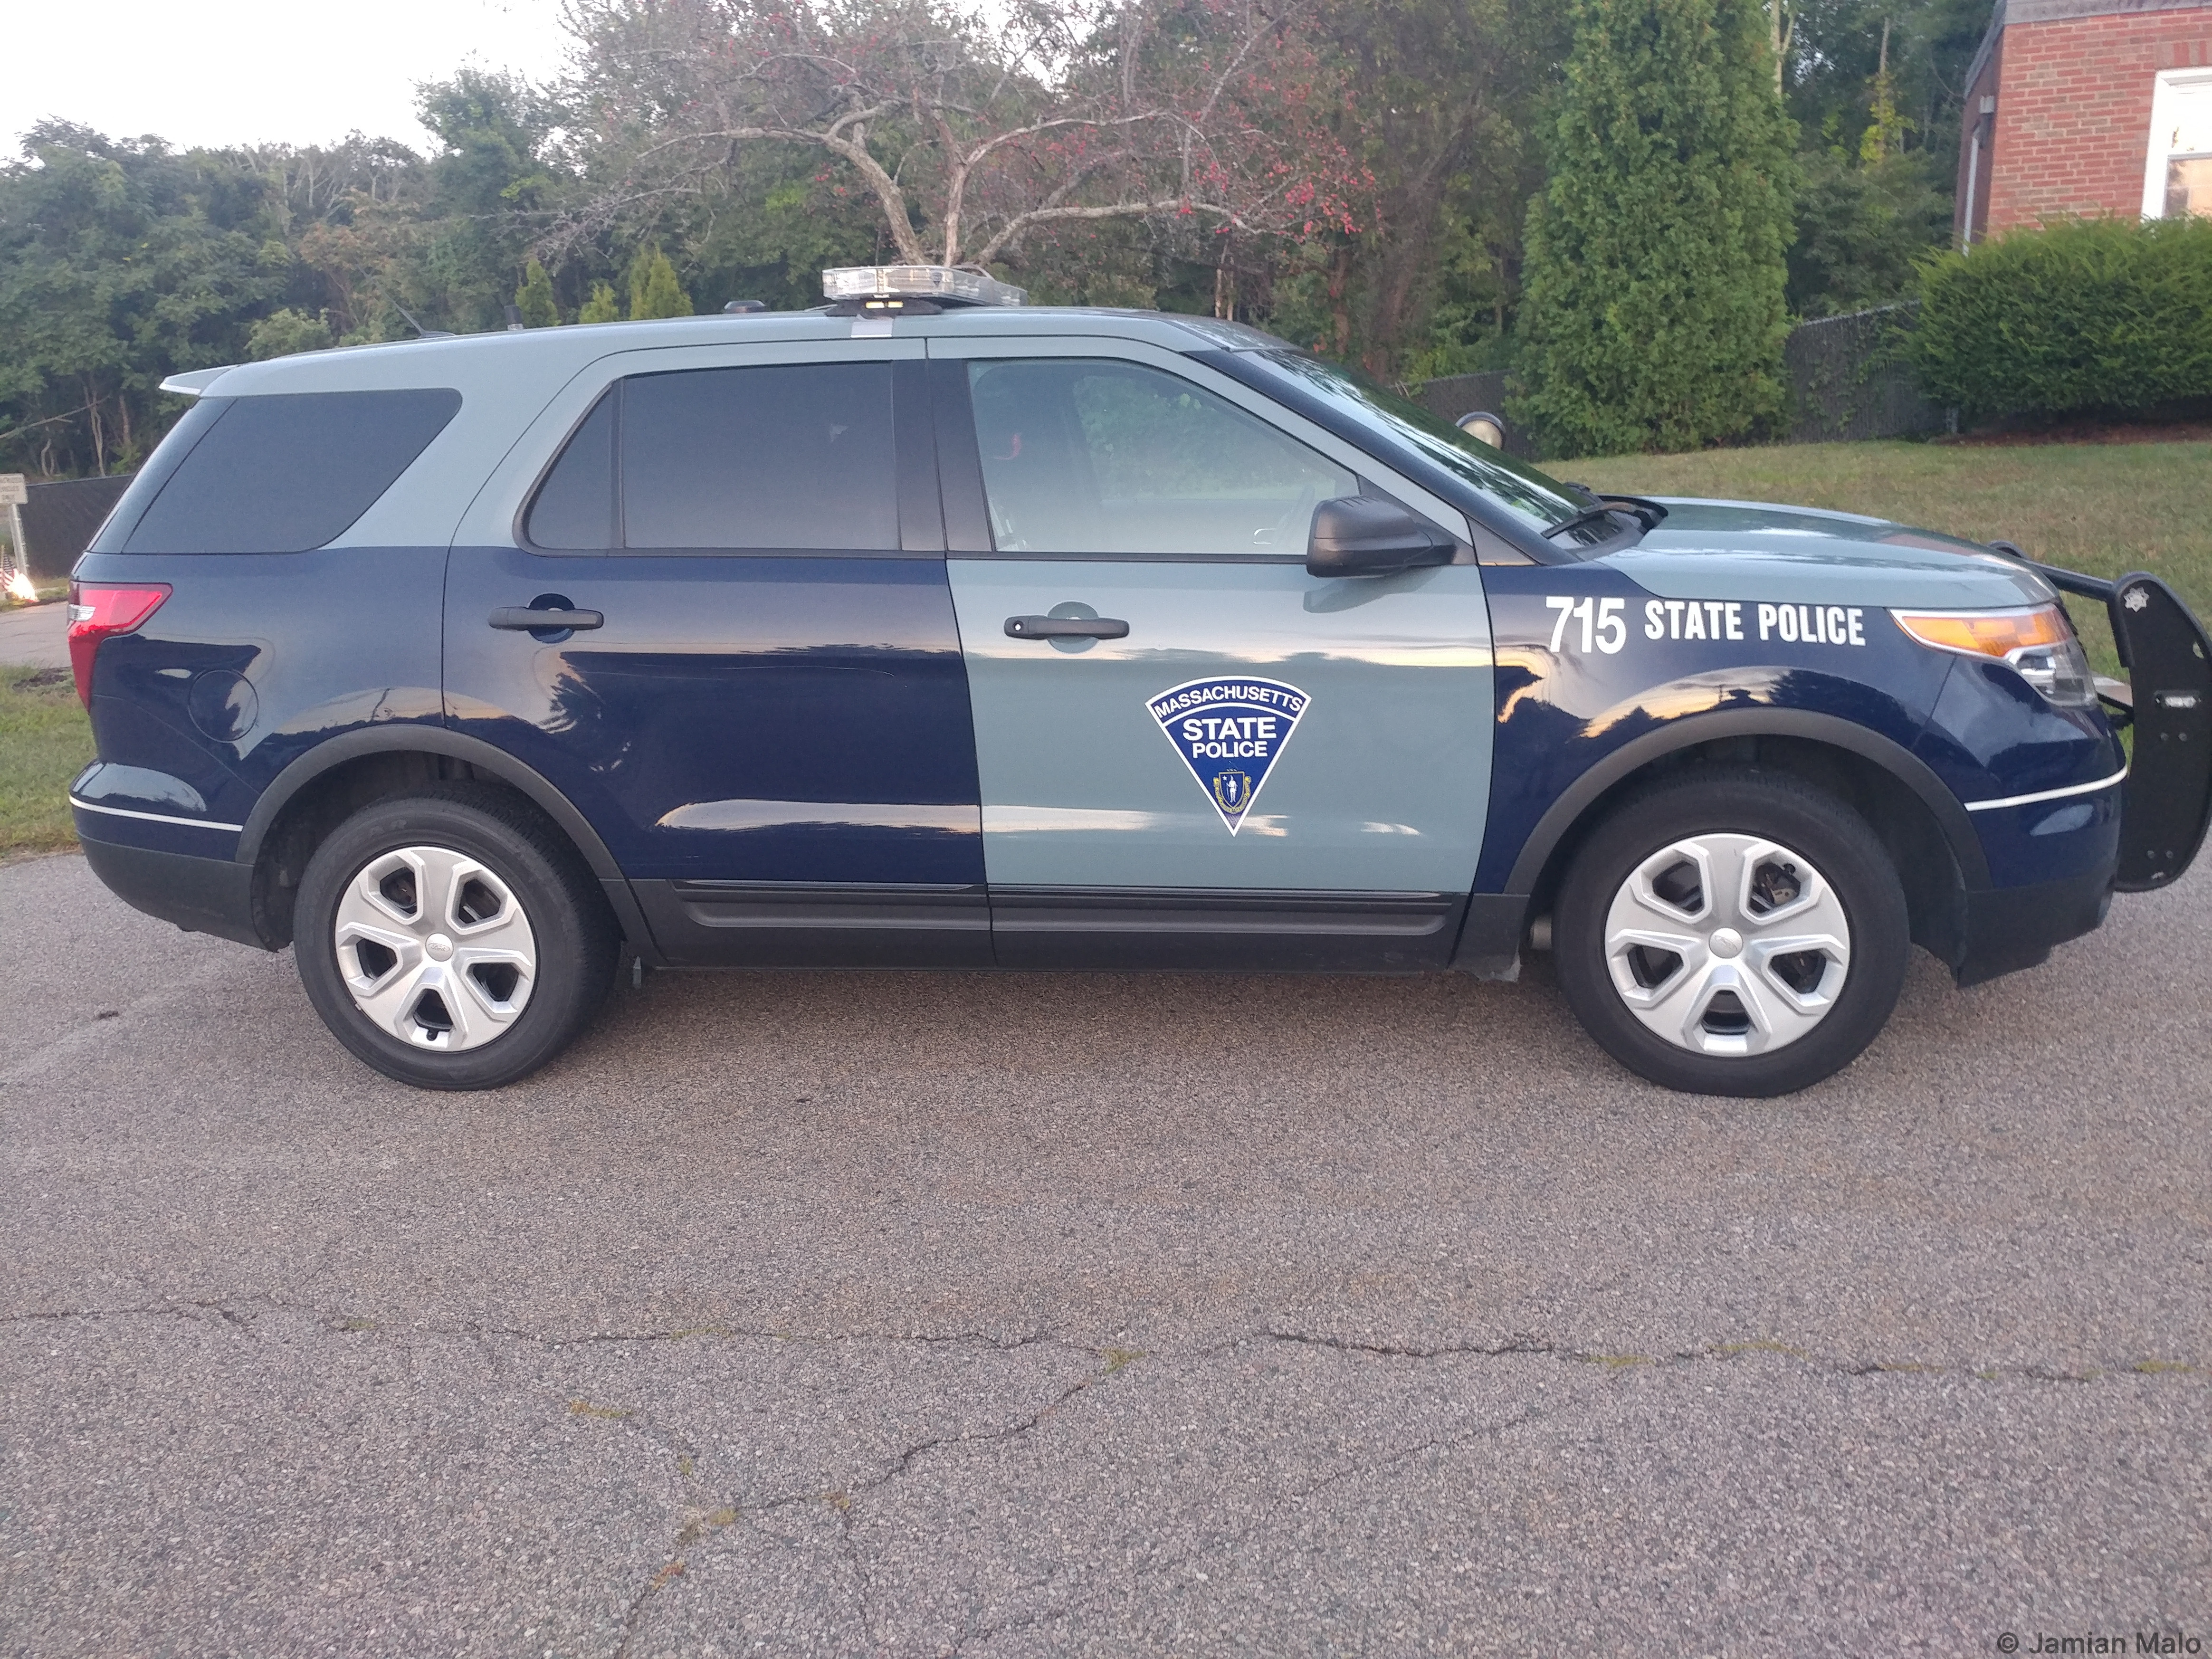 A photo  of Massachusetts State Police
            Cruiser 715, a 2015 Ford Police Interceptor Utility             taken by Jamian Malo